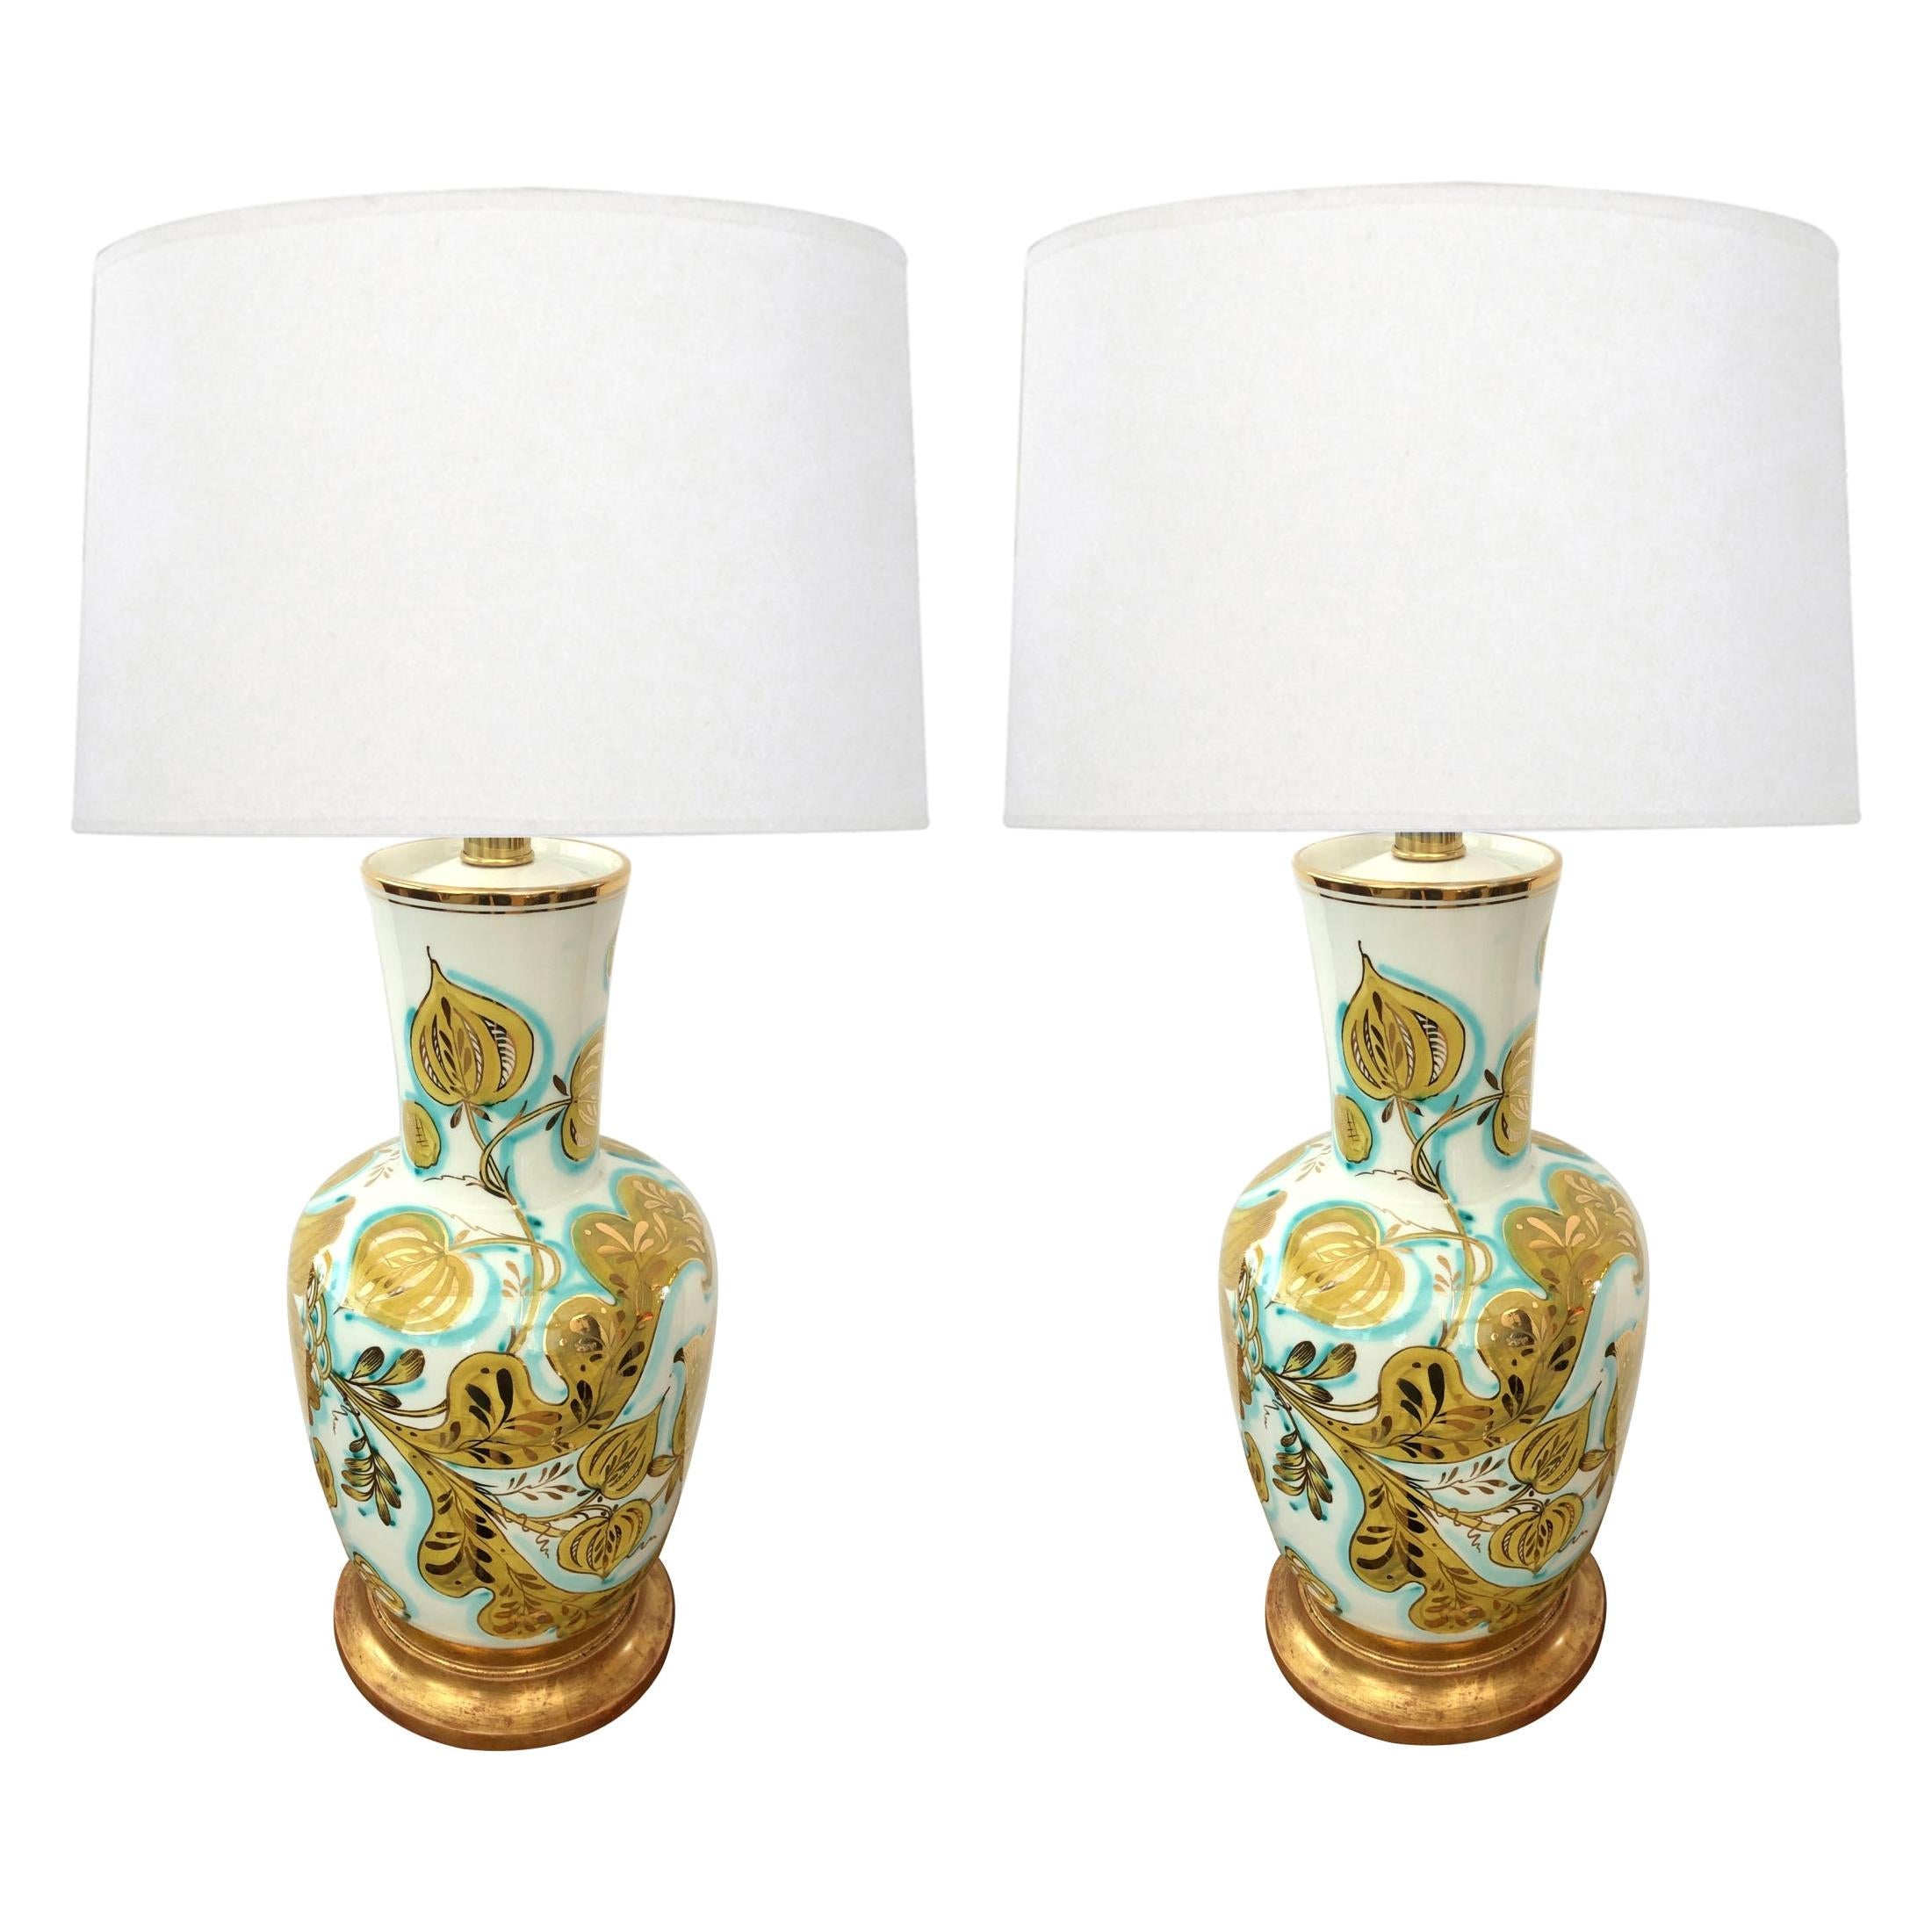 Pair of Italian 1950's Painted Porcelain Lamps for Marbro Lamp Co., Los Angeles